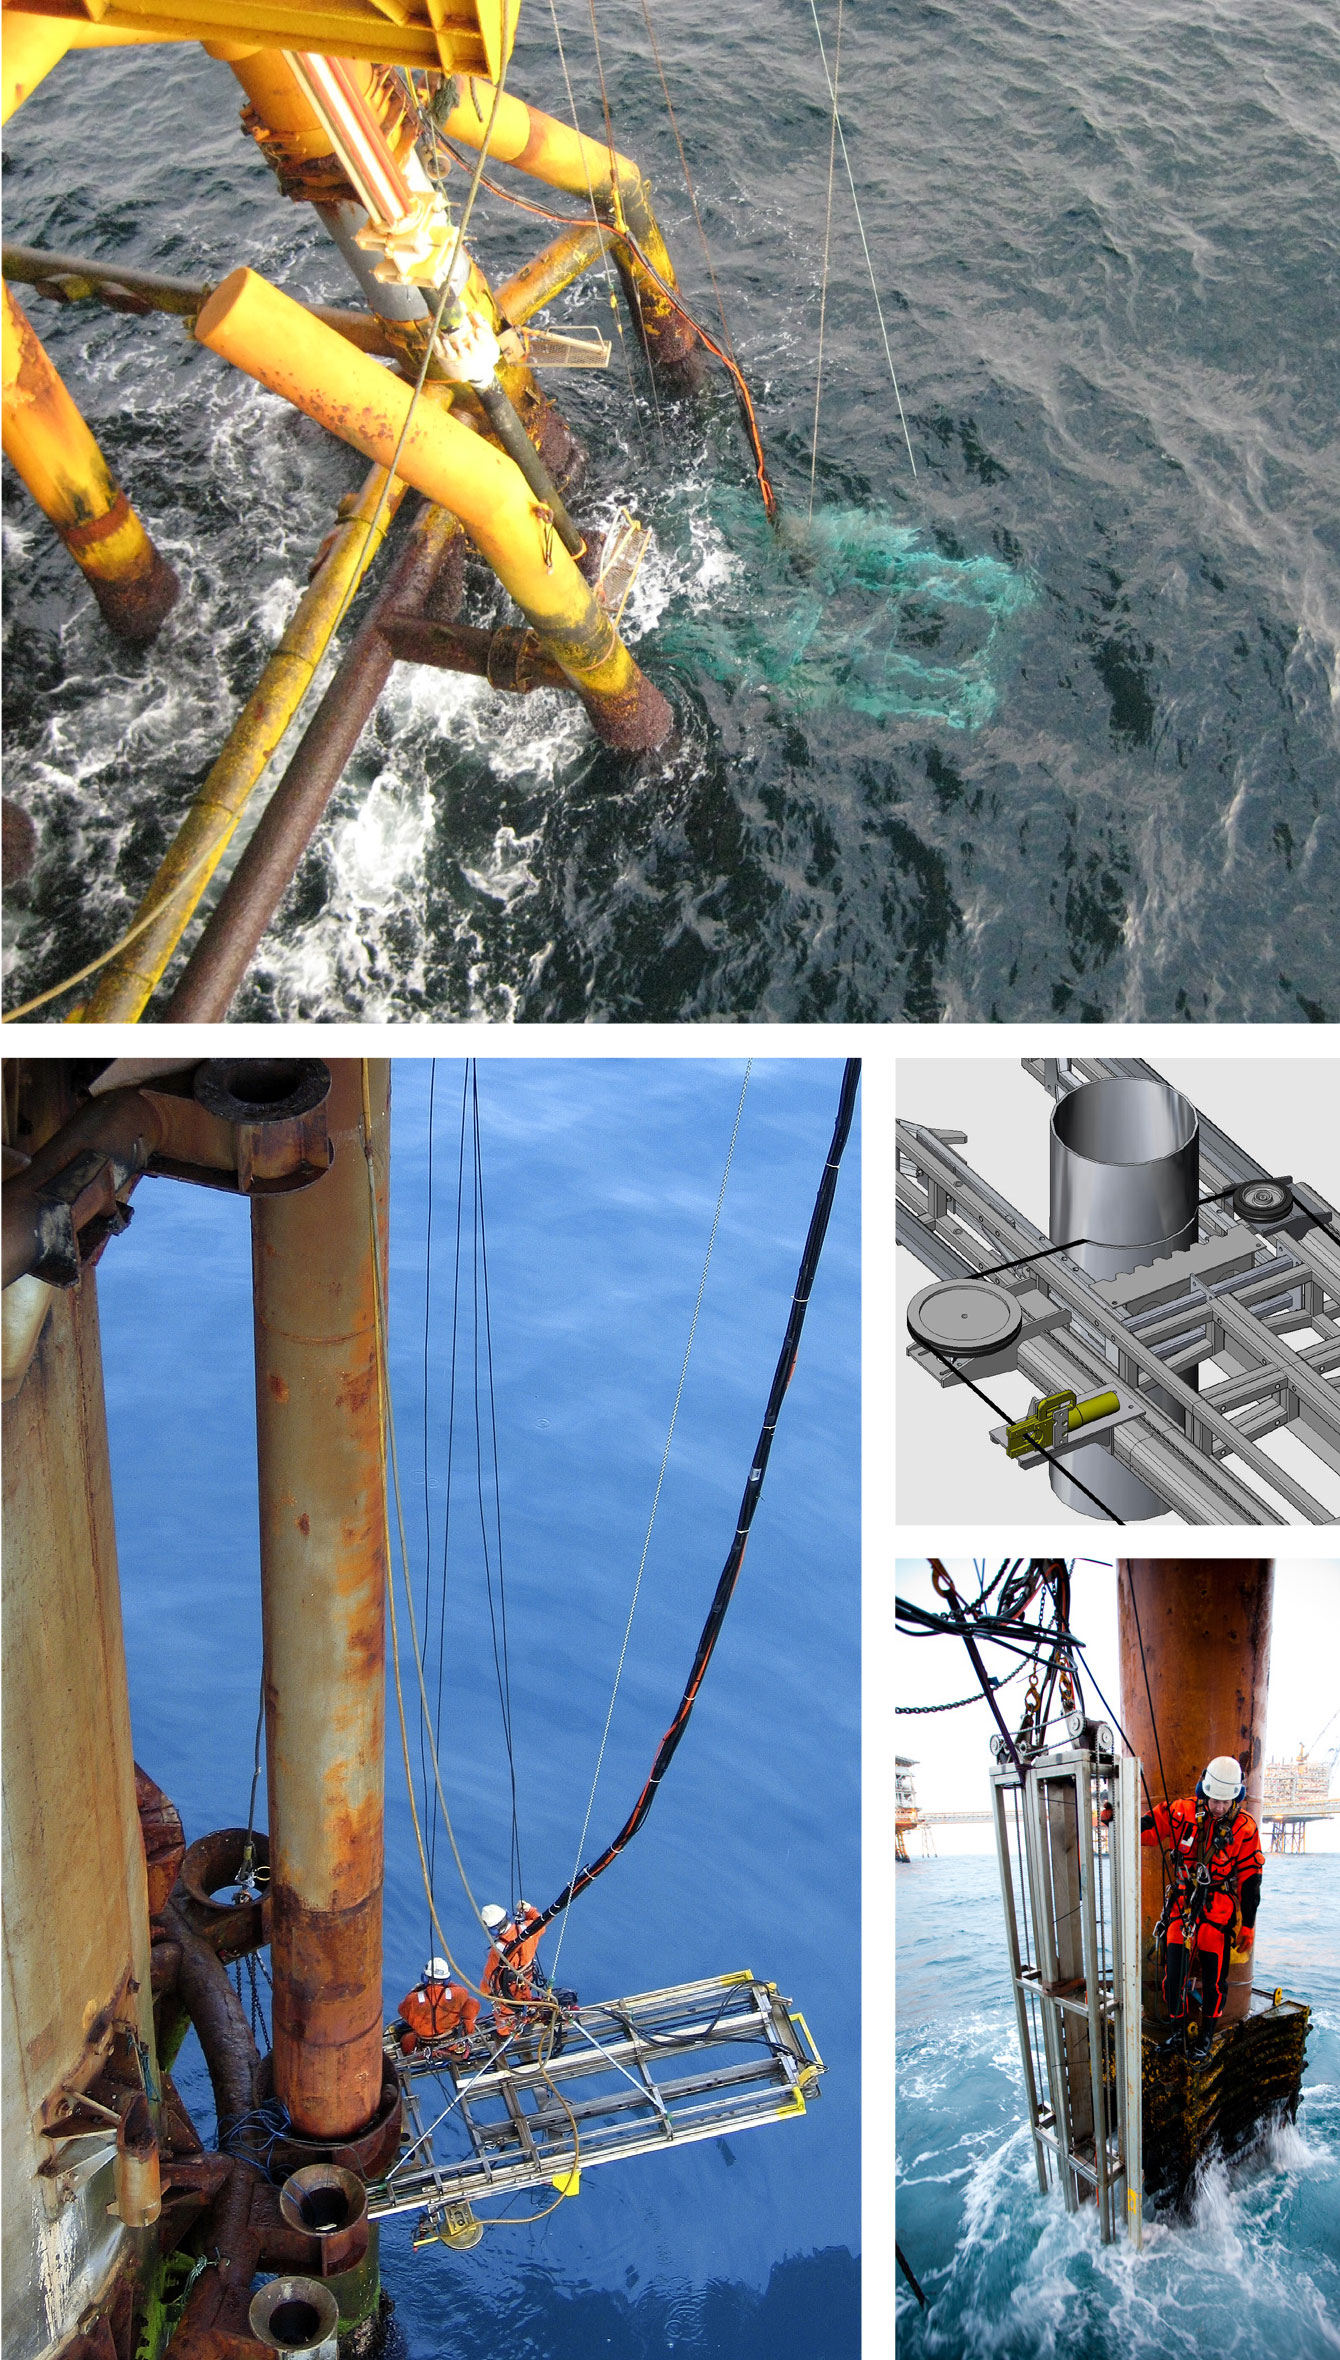 SUBSEA CUTTING WITH DIAMOND WIRE